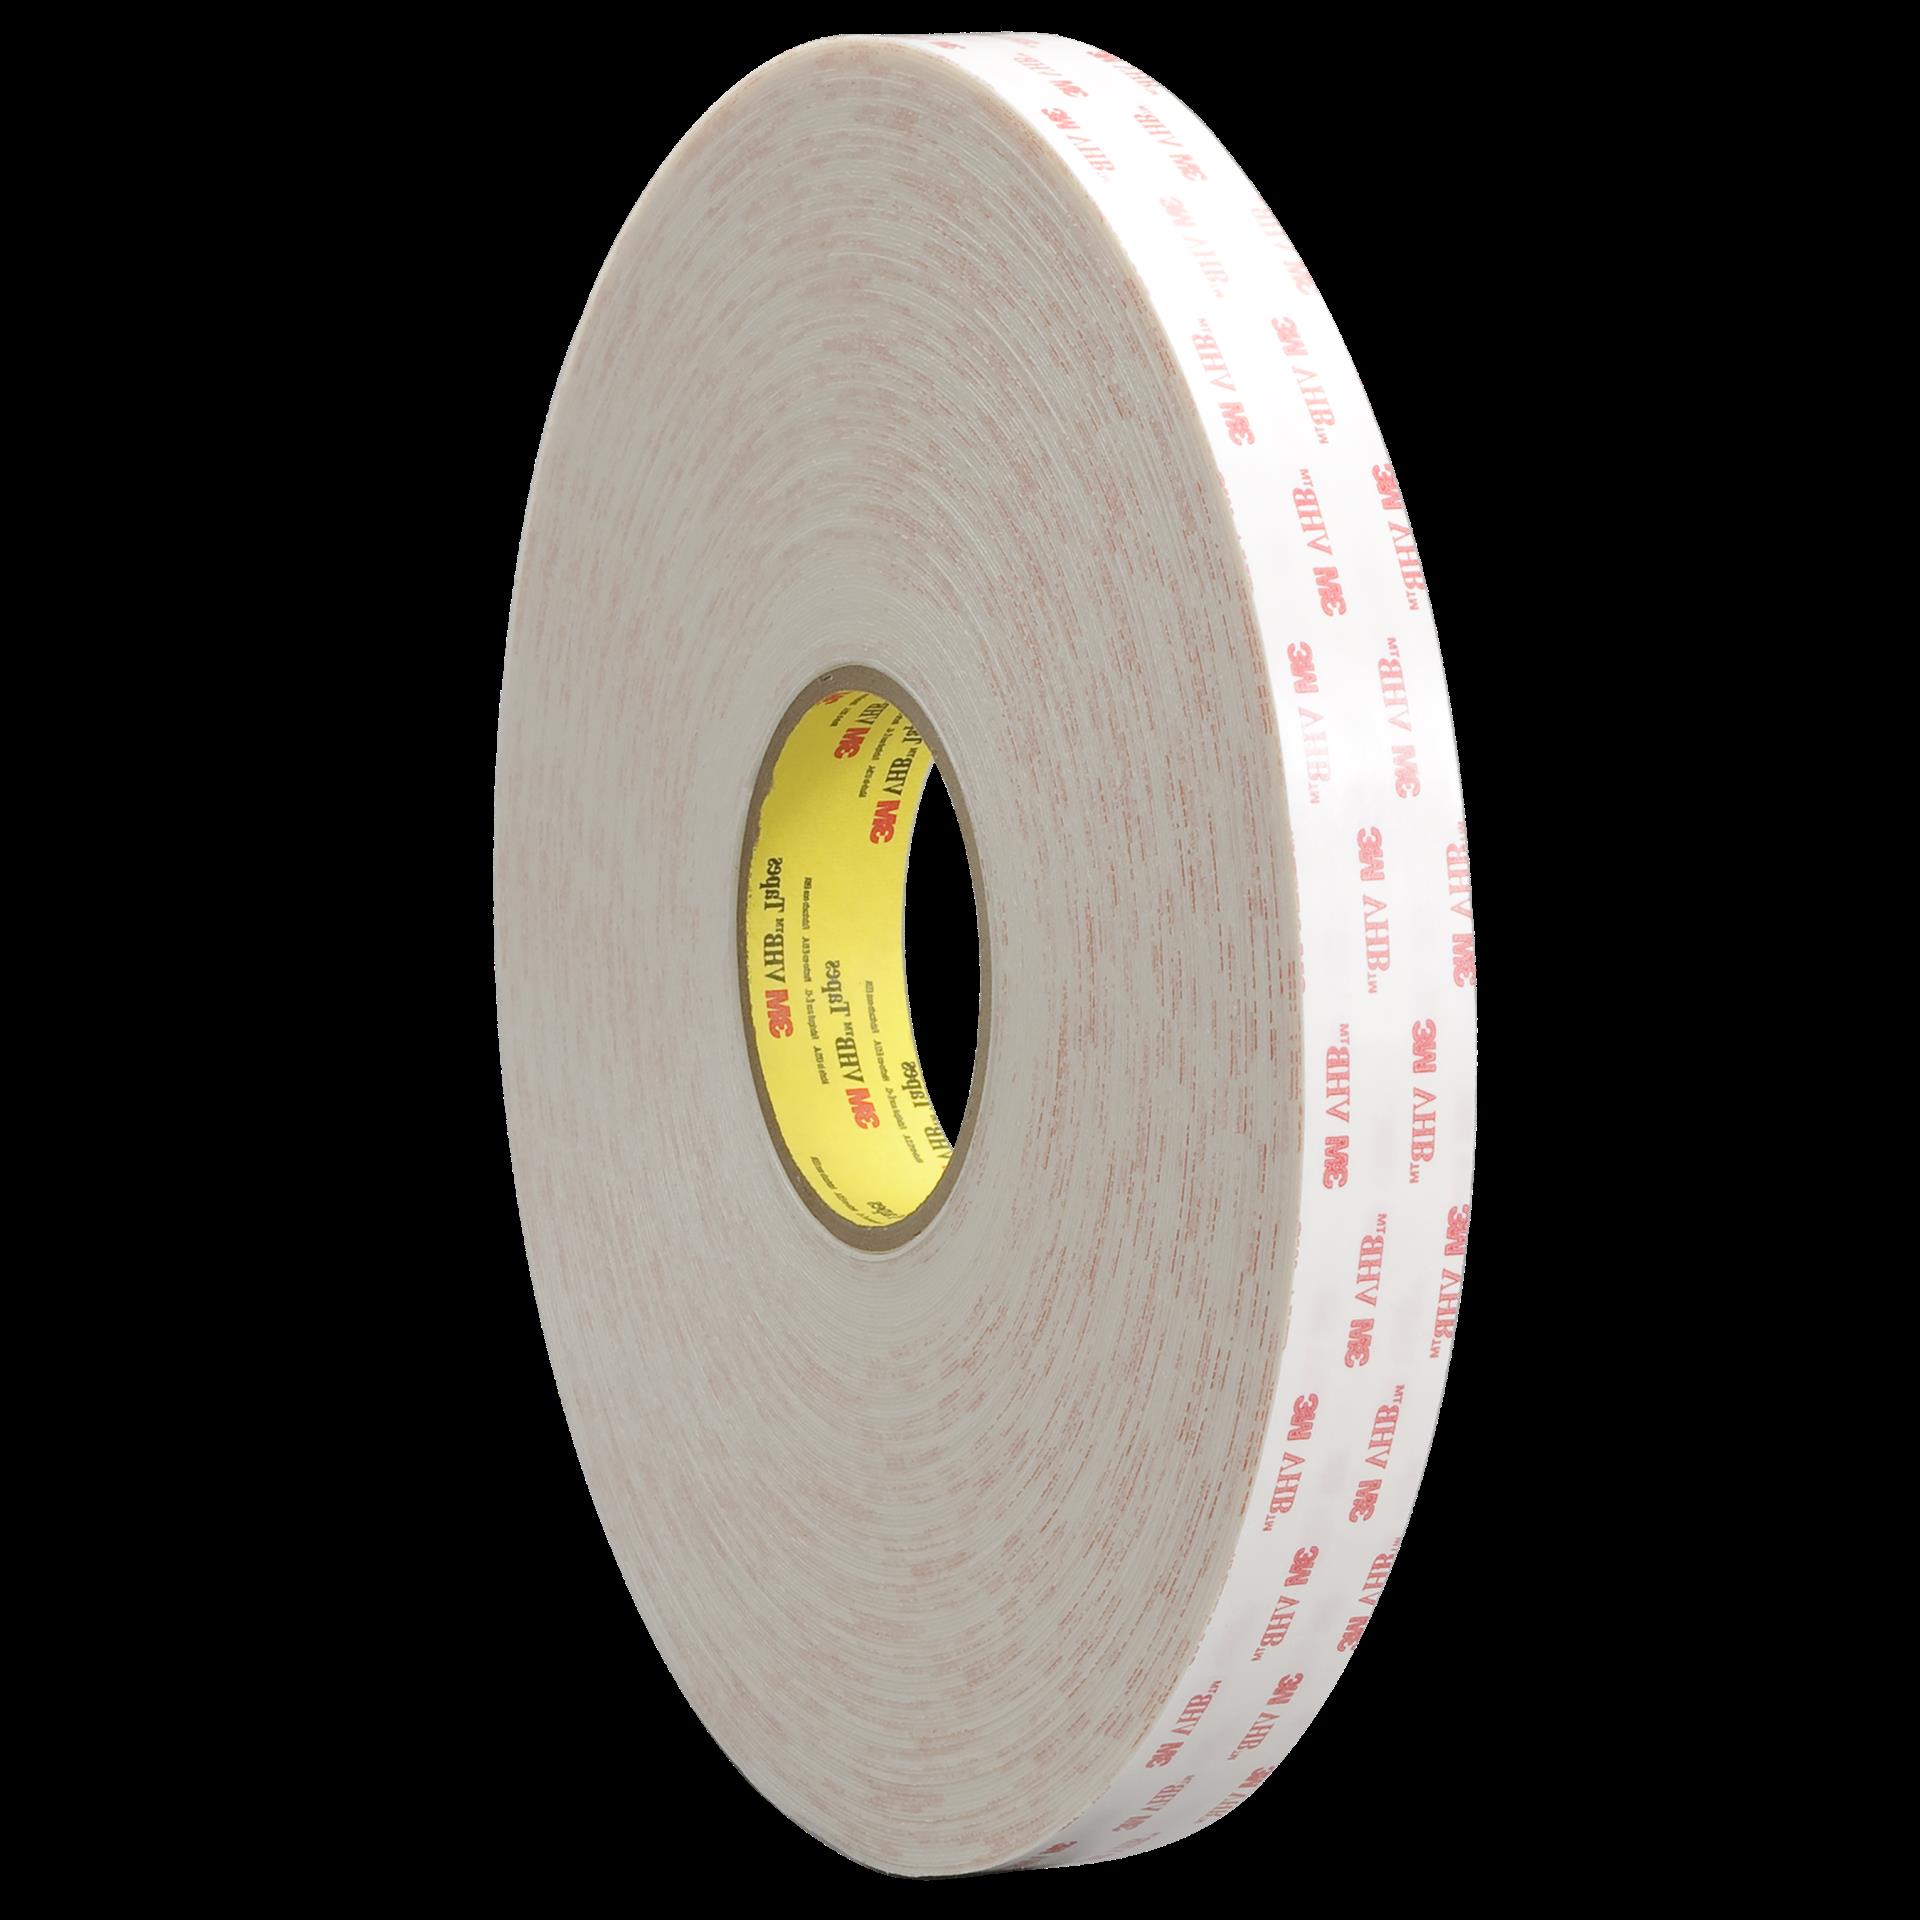 00021200430107, 3M™ VHB™ Tape 4952, White, 1/4 in x 36 yd, 45 mil, 36  rolls per case, Aircraft product, VHB-Tapes